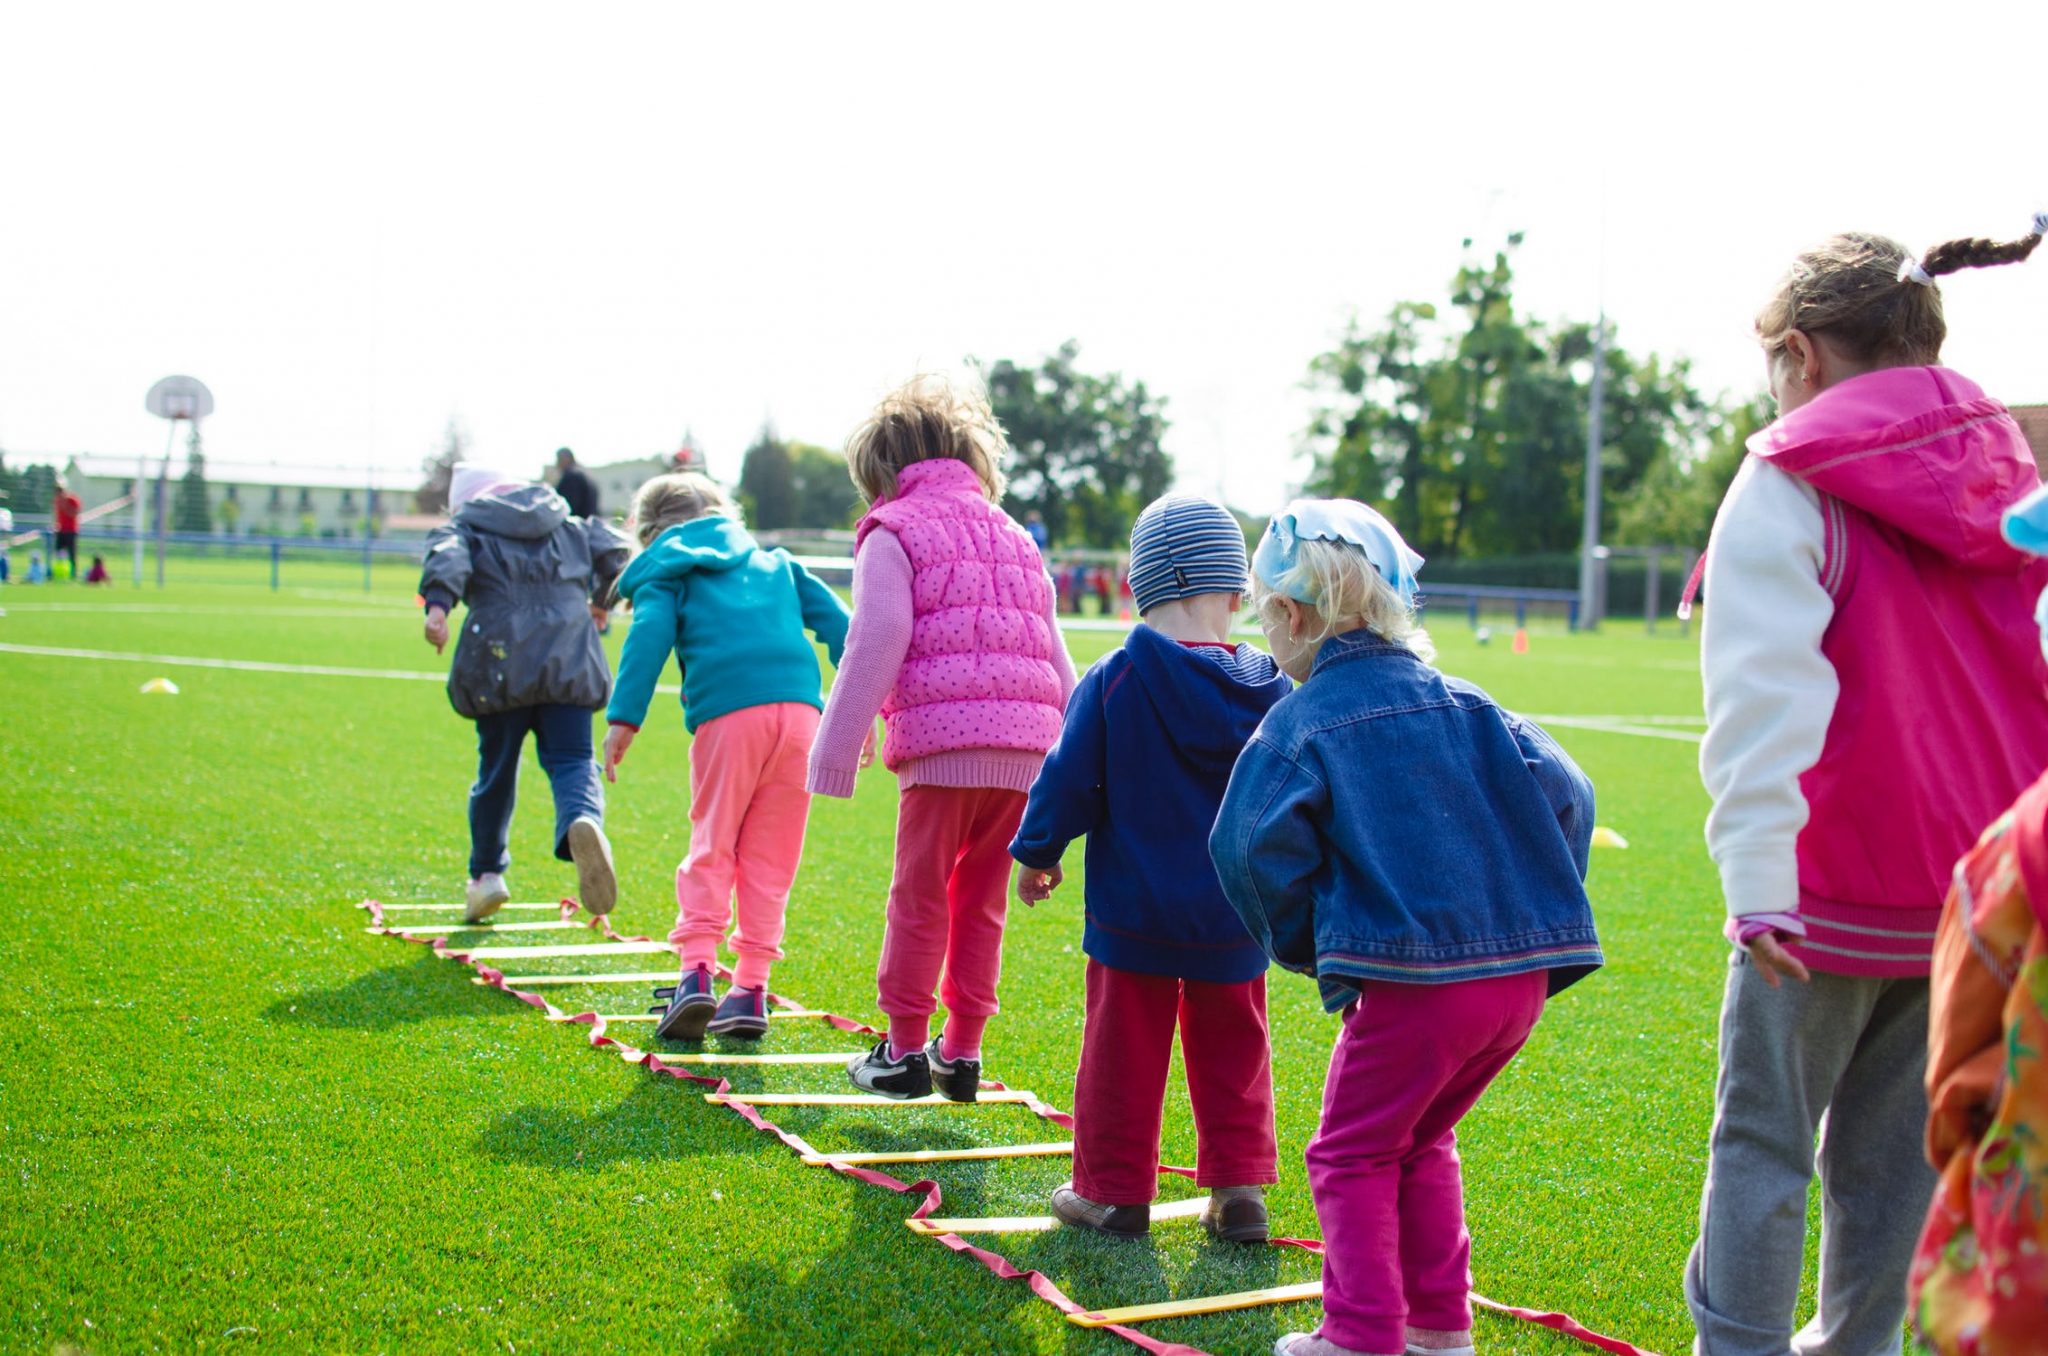 preschoolers-physical-activity-is-linked-to-cognitive-development-early-learning-nation